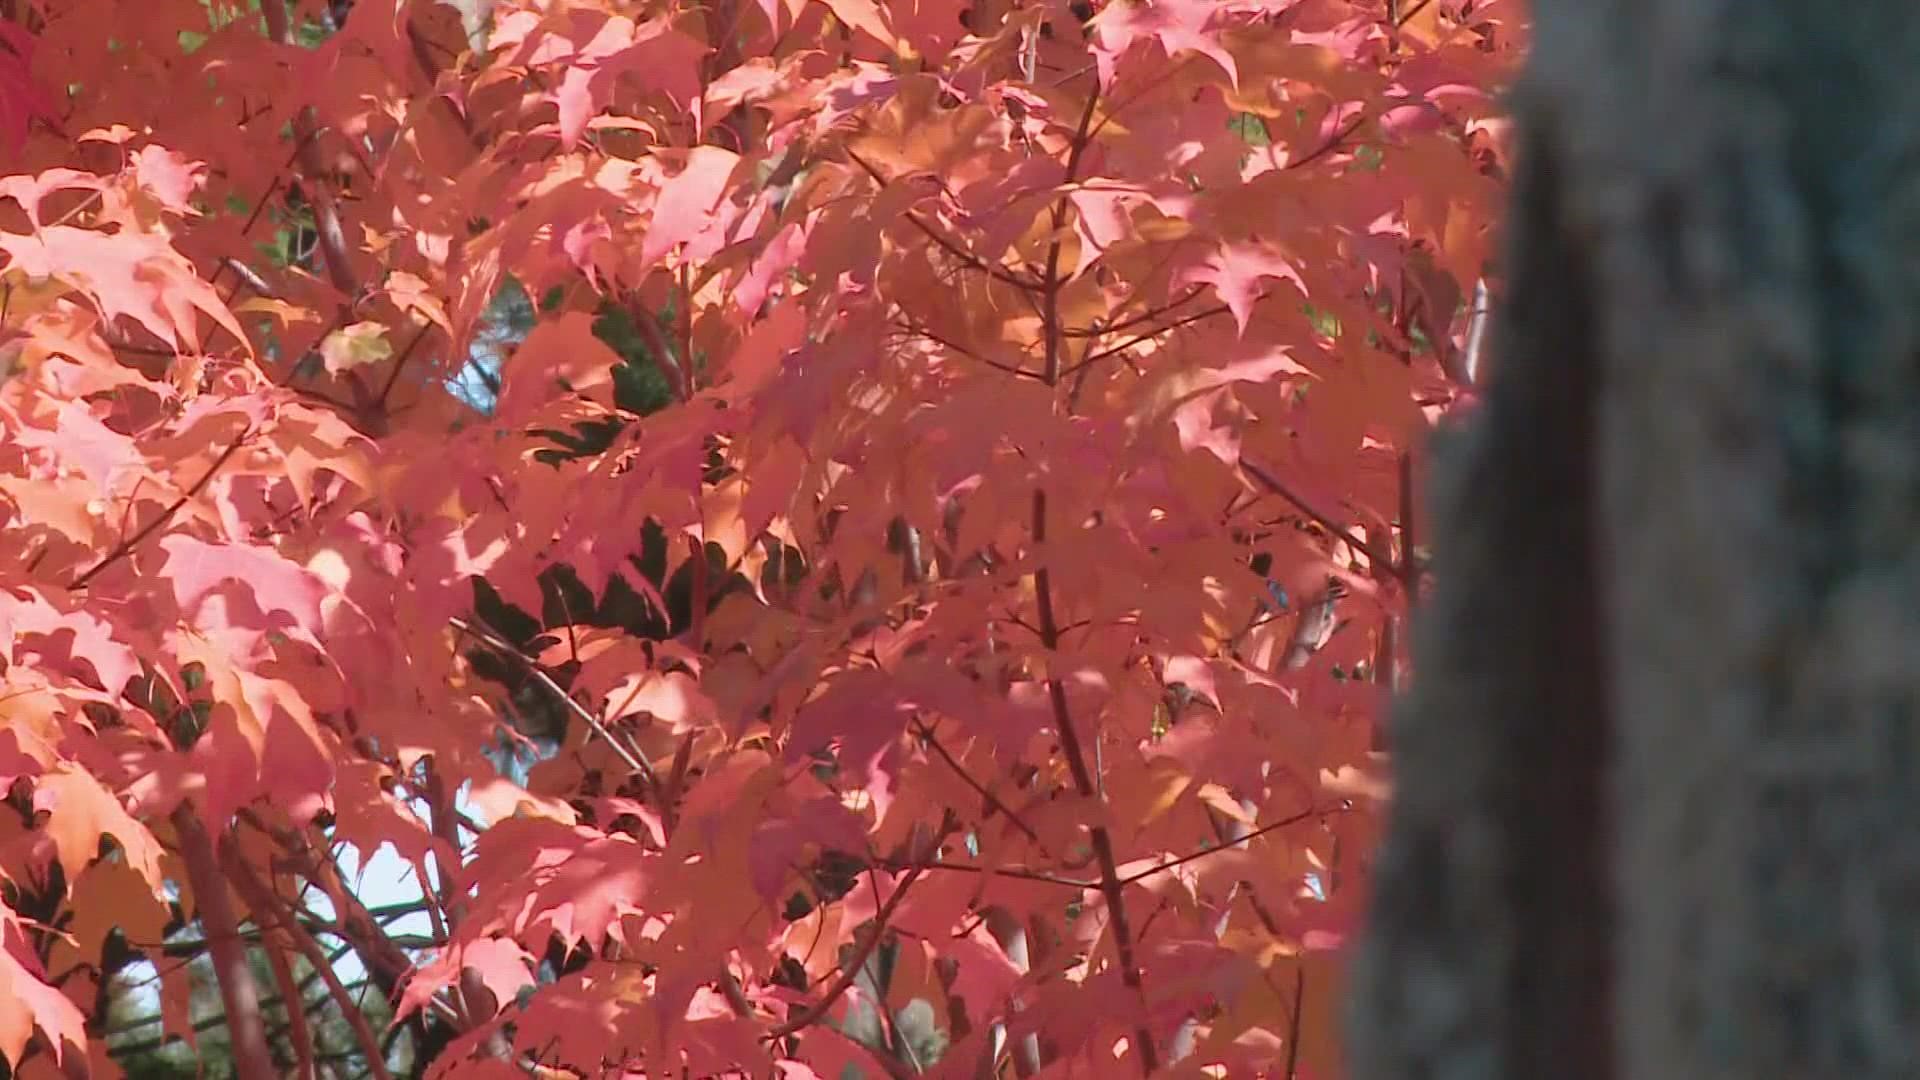 Foliage peeping season is nearly here. Ryan Breton breaks down what we can expect.